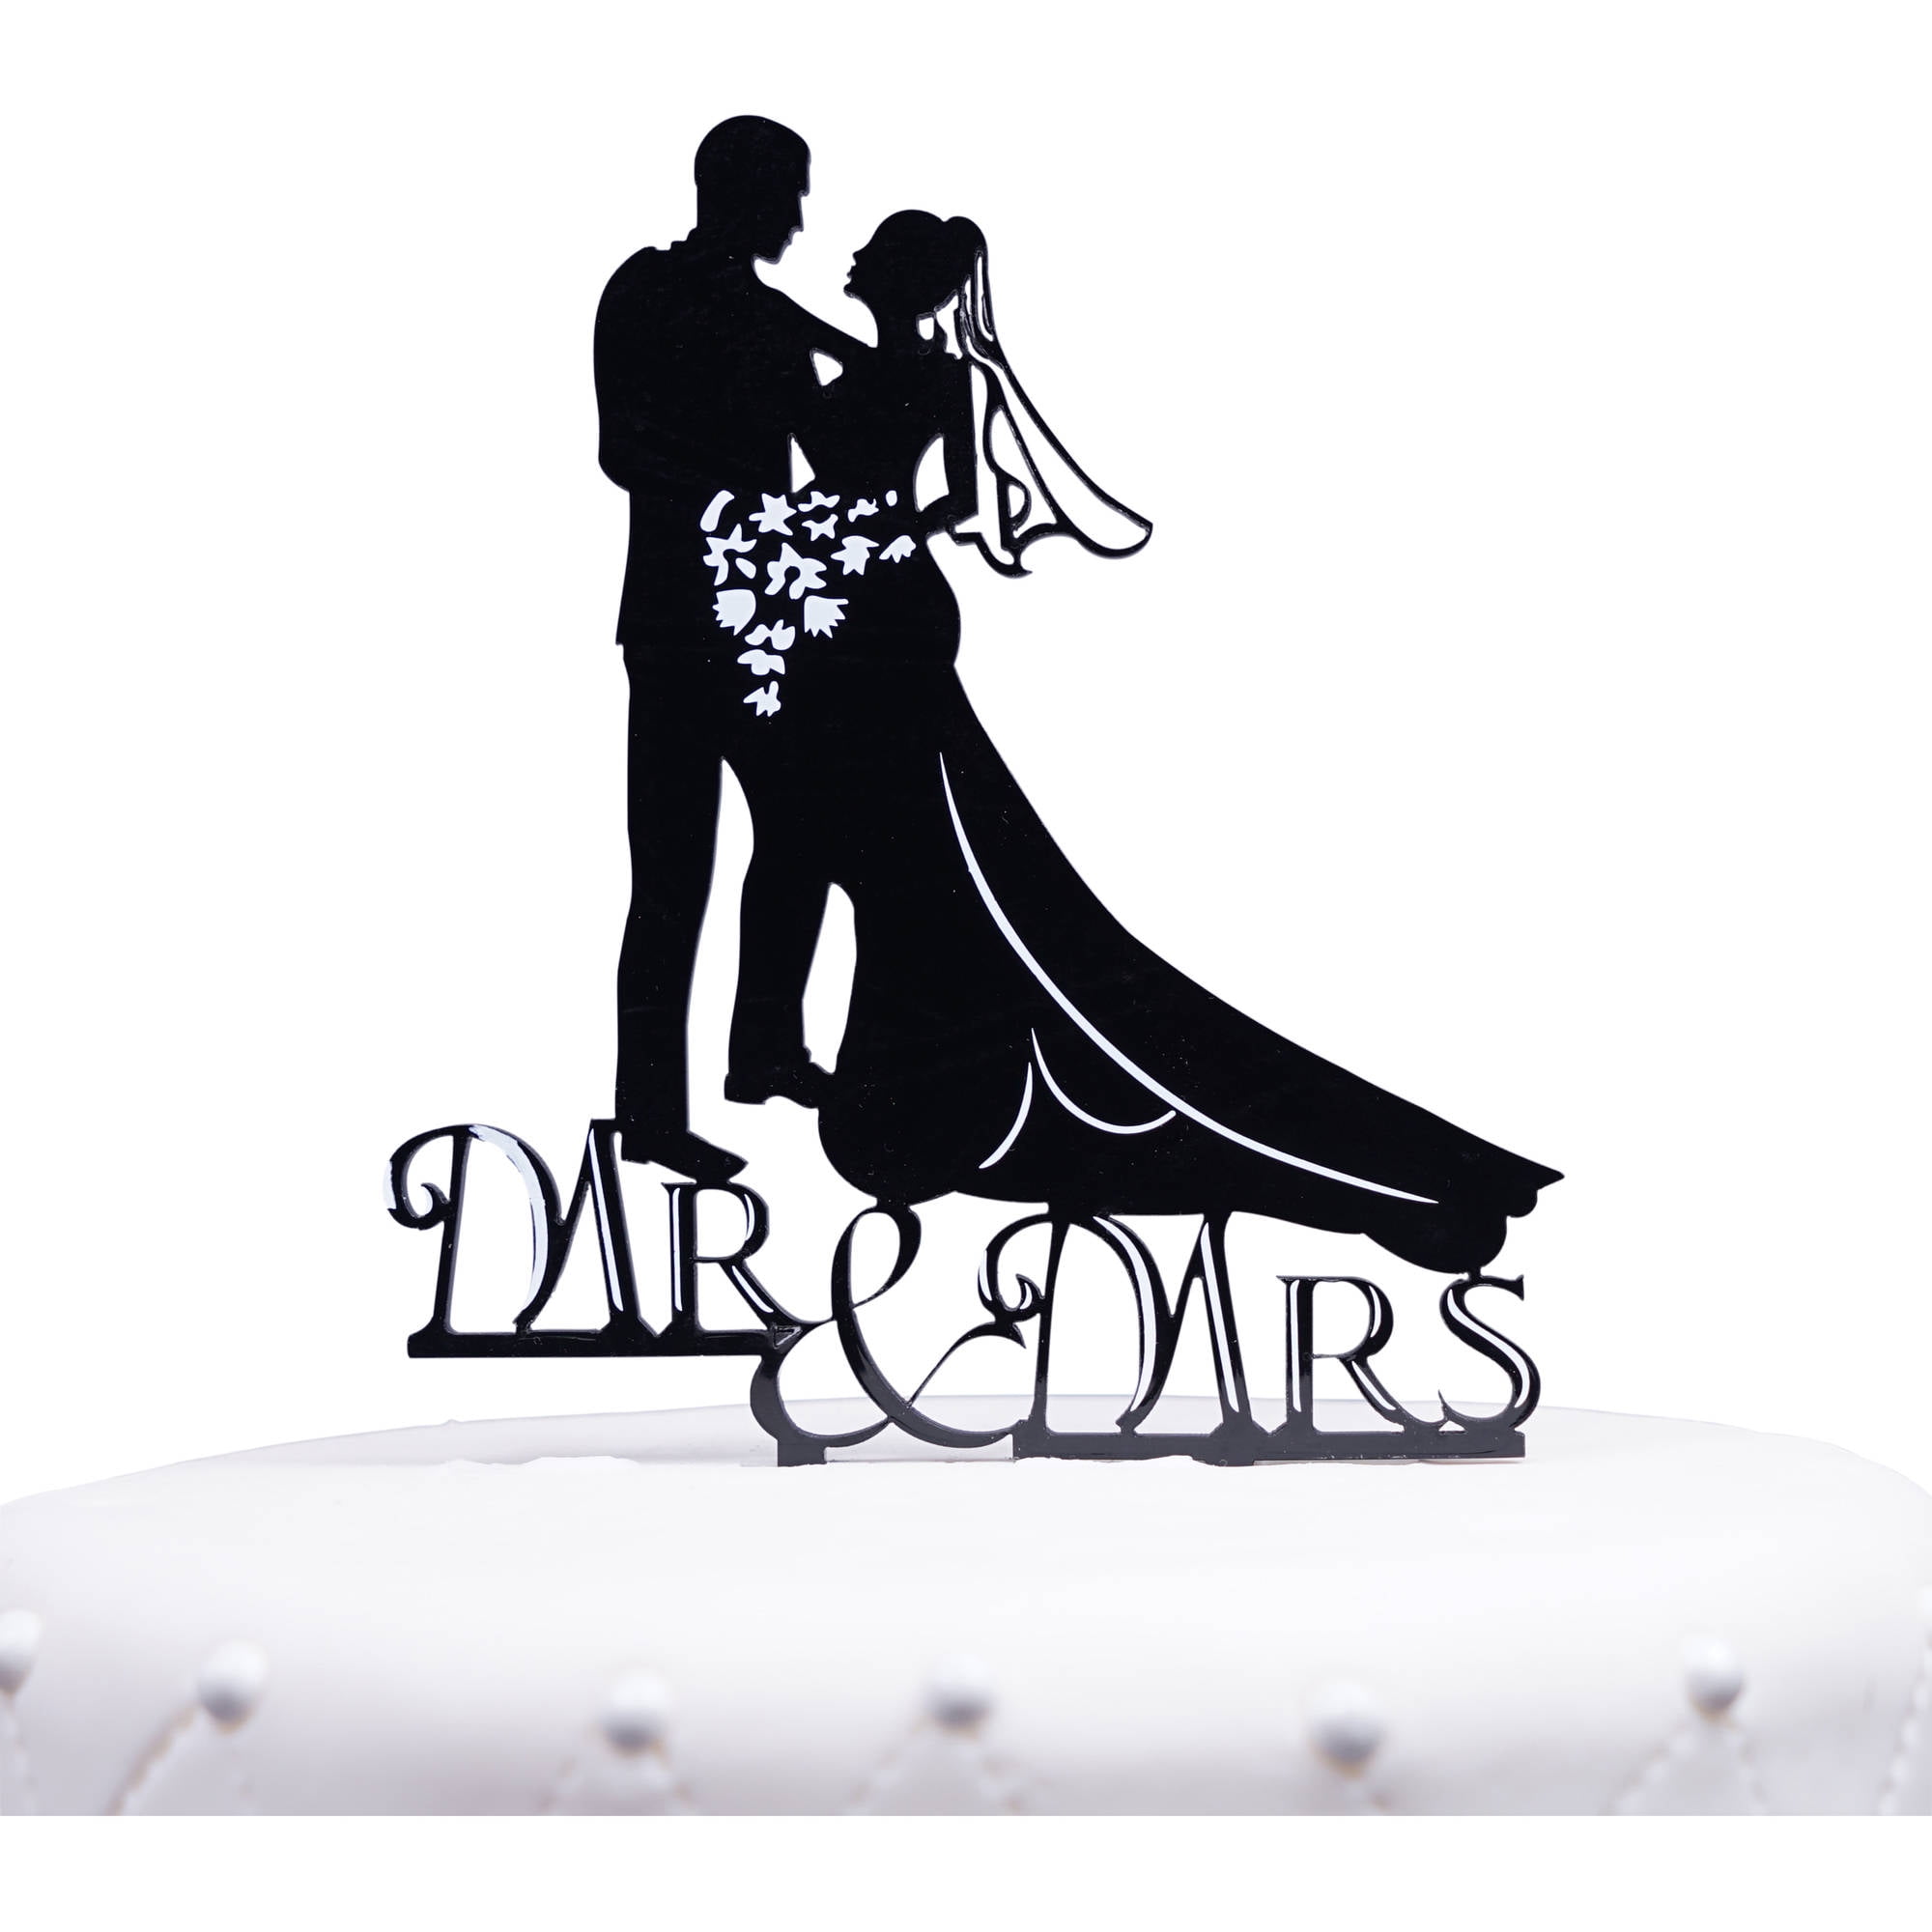 Creative Wedding Cake Toppers That are Fun and Unique | Eivan's Photo